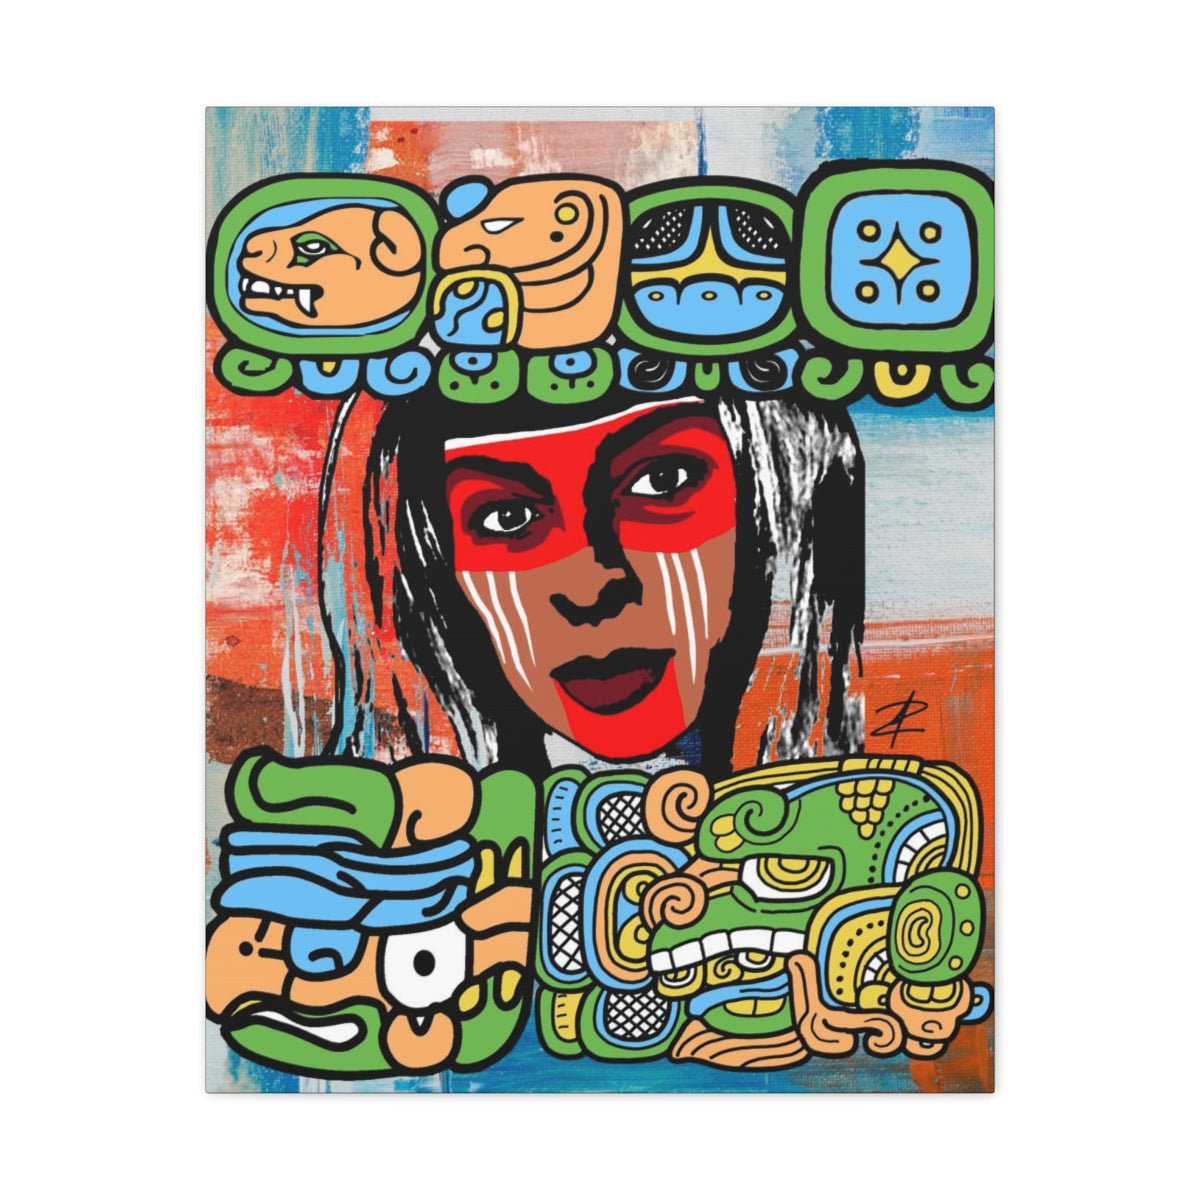 Mayan Life by Jesse Raudales Canvas Gallery Wraps